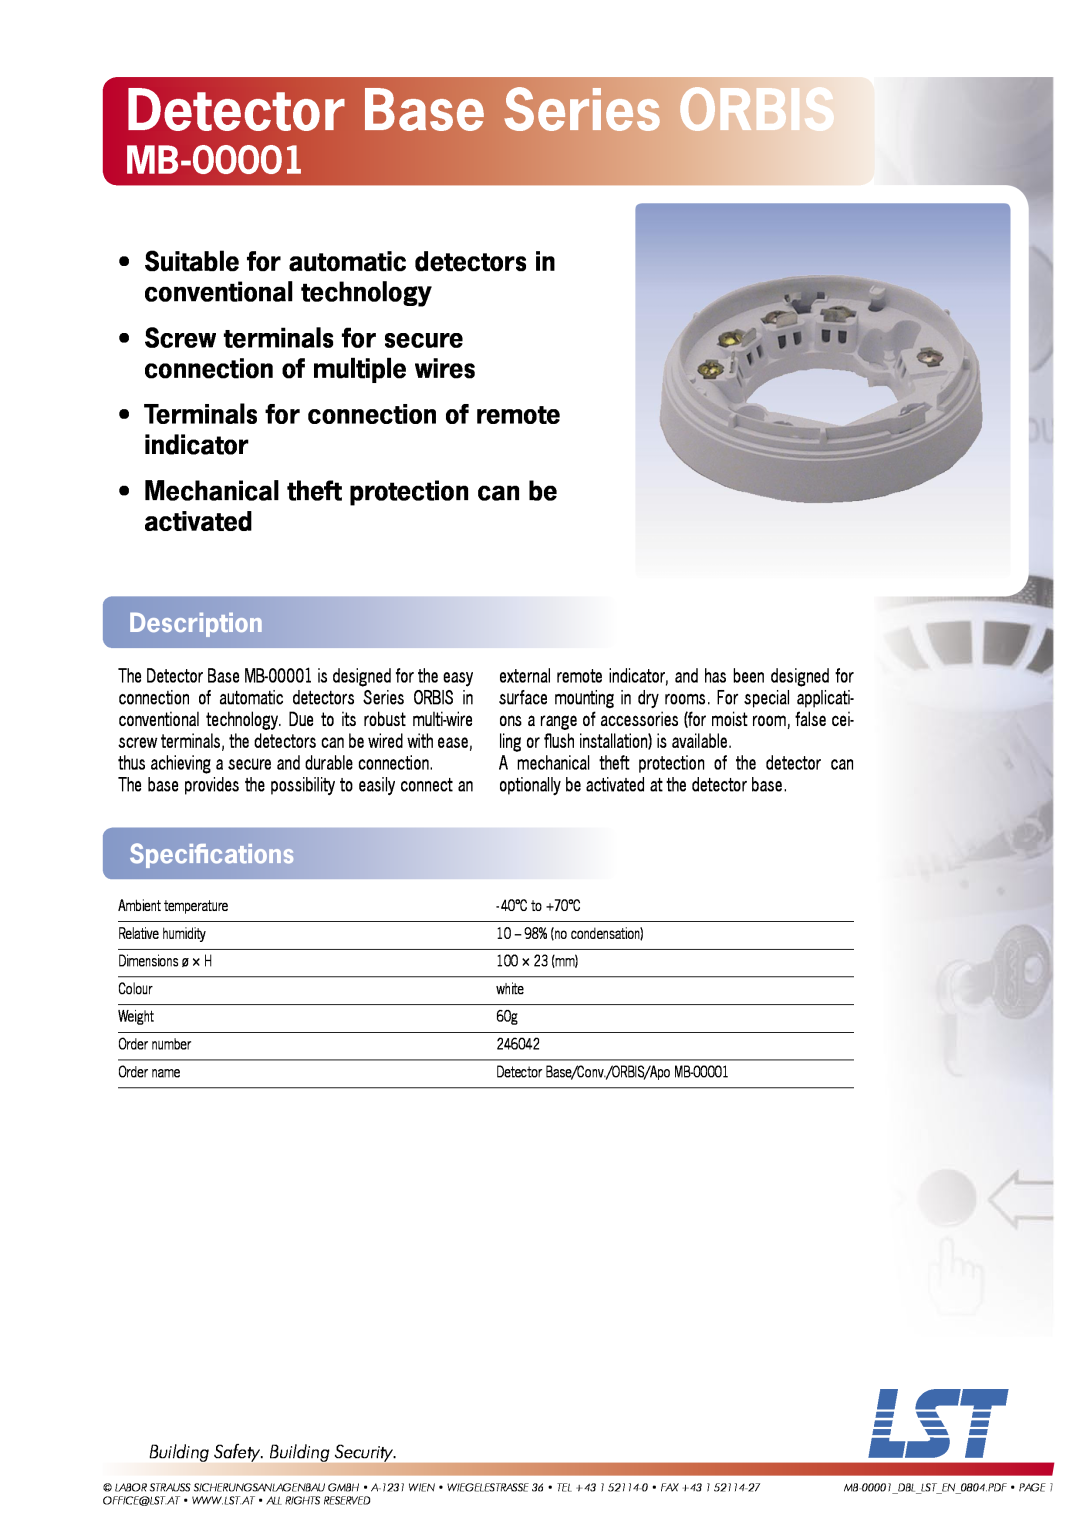 LST 246042 specifications Detector Base Series ORBIS, MB-00001, Terminals for connection of remote indicator, Description 